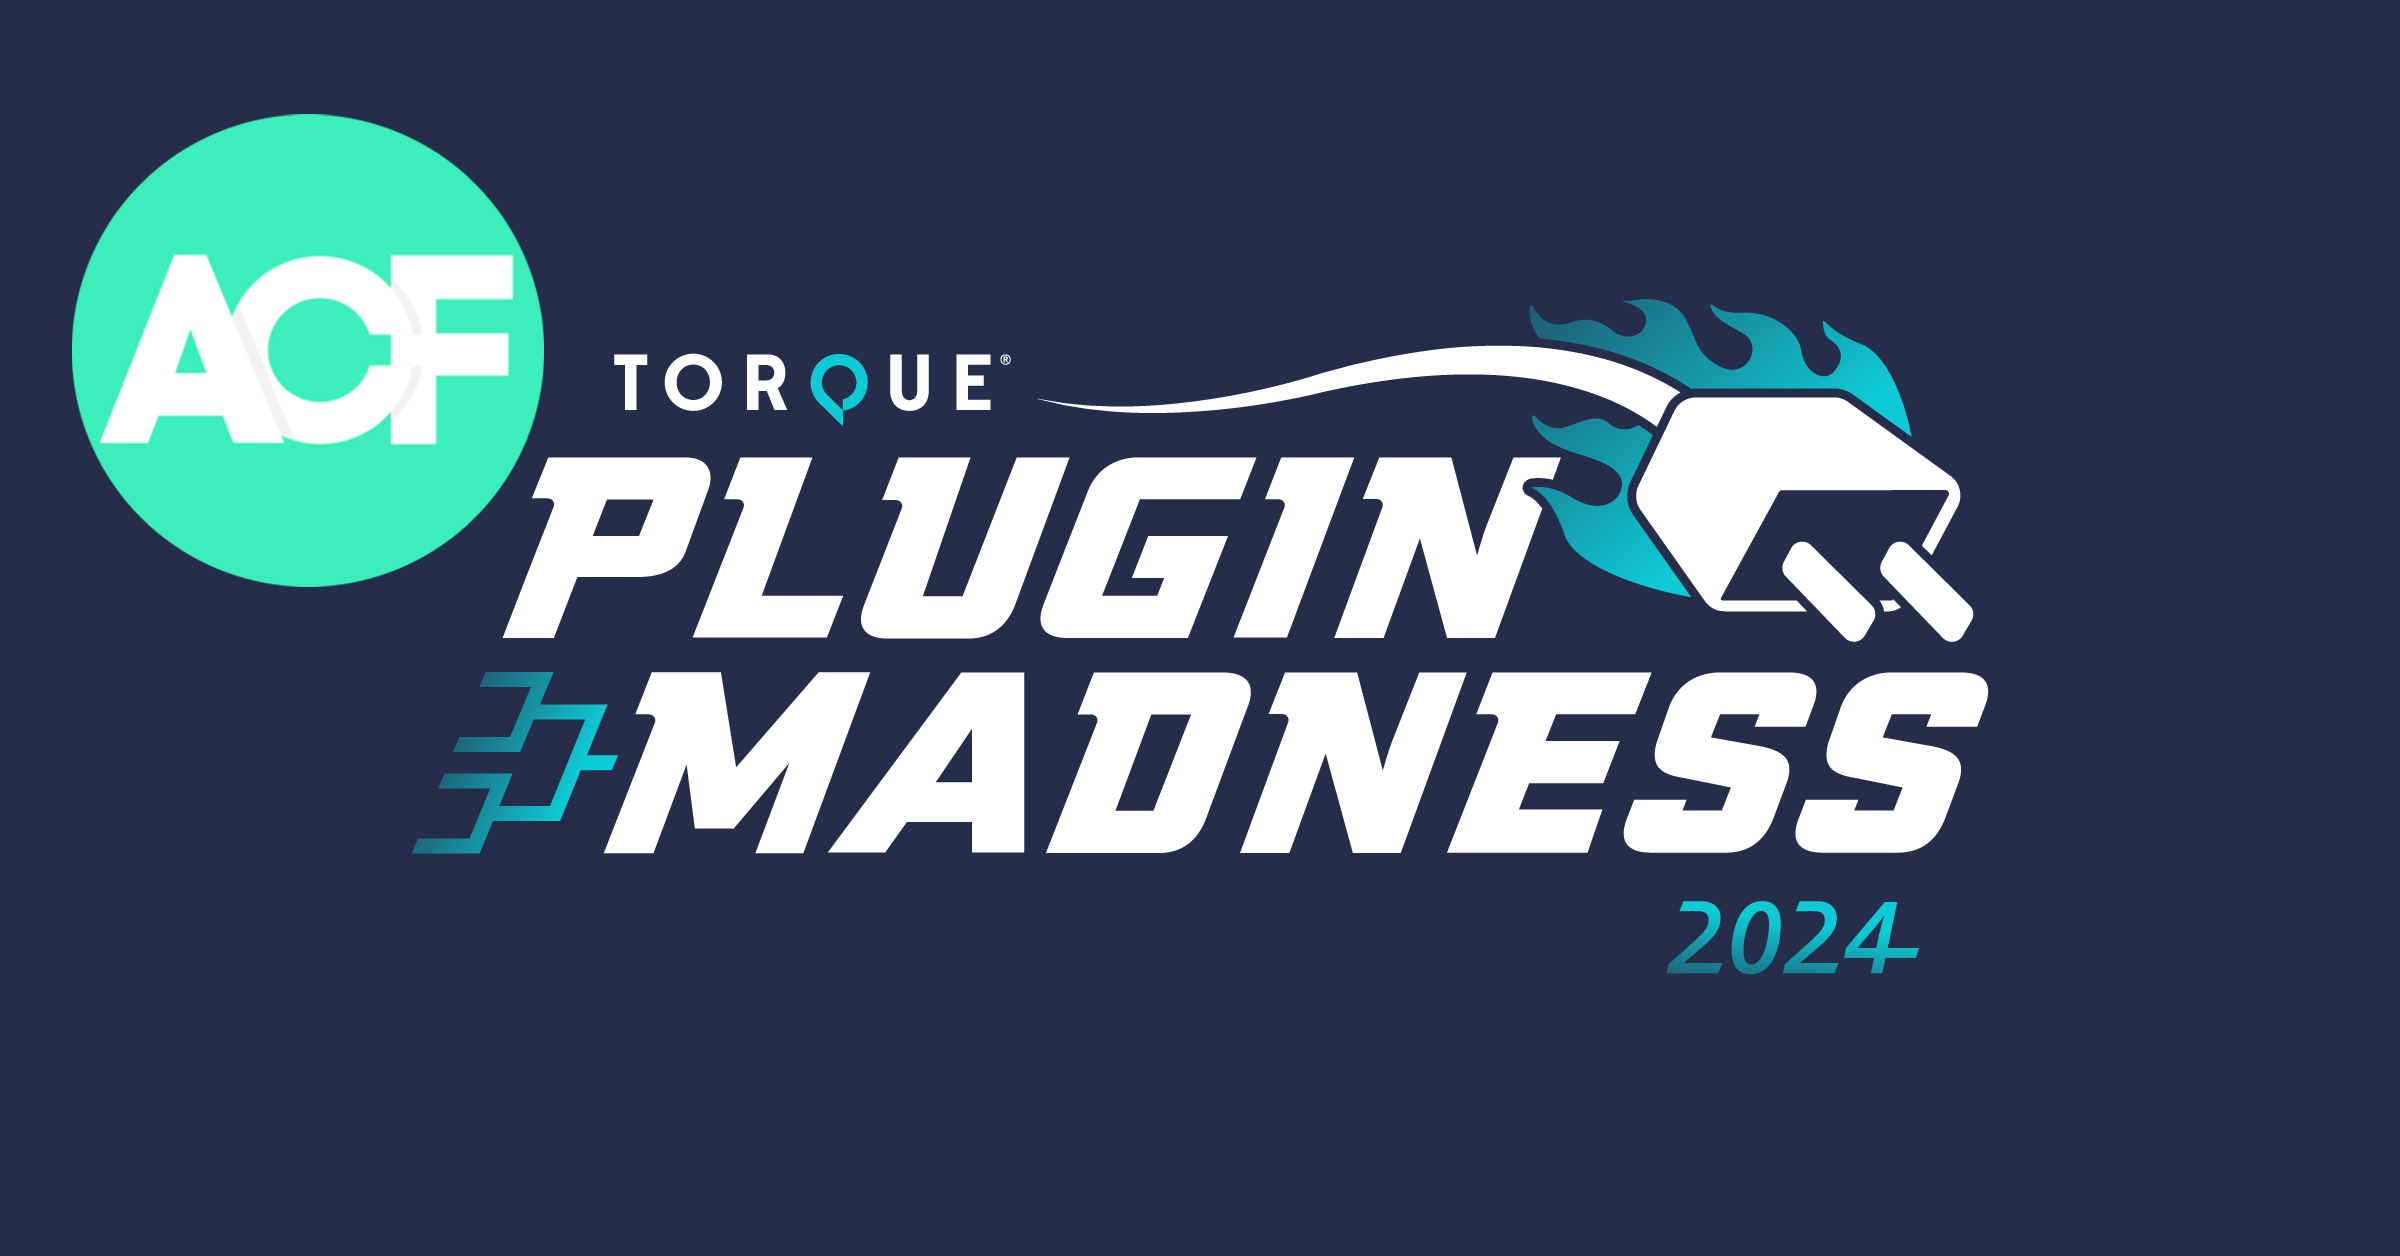 Plugin Madness promo image with ACF logo in the top left corner